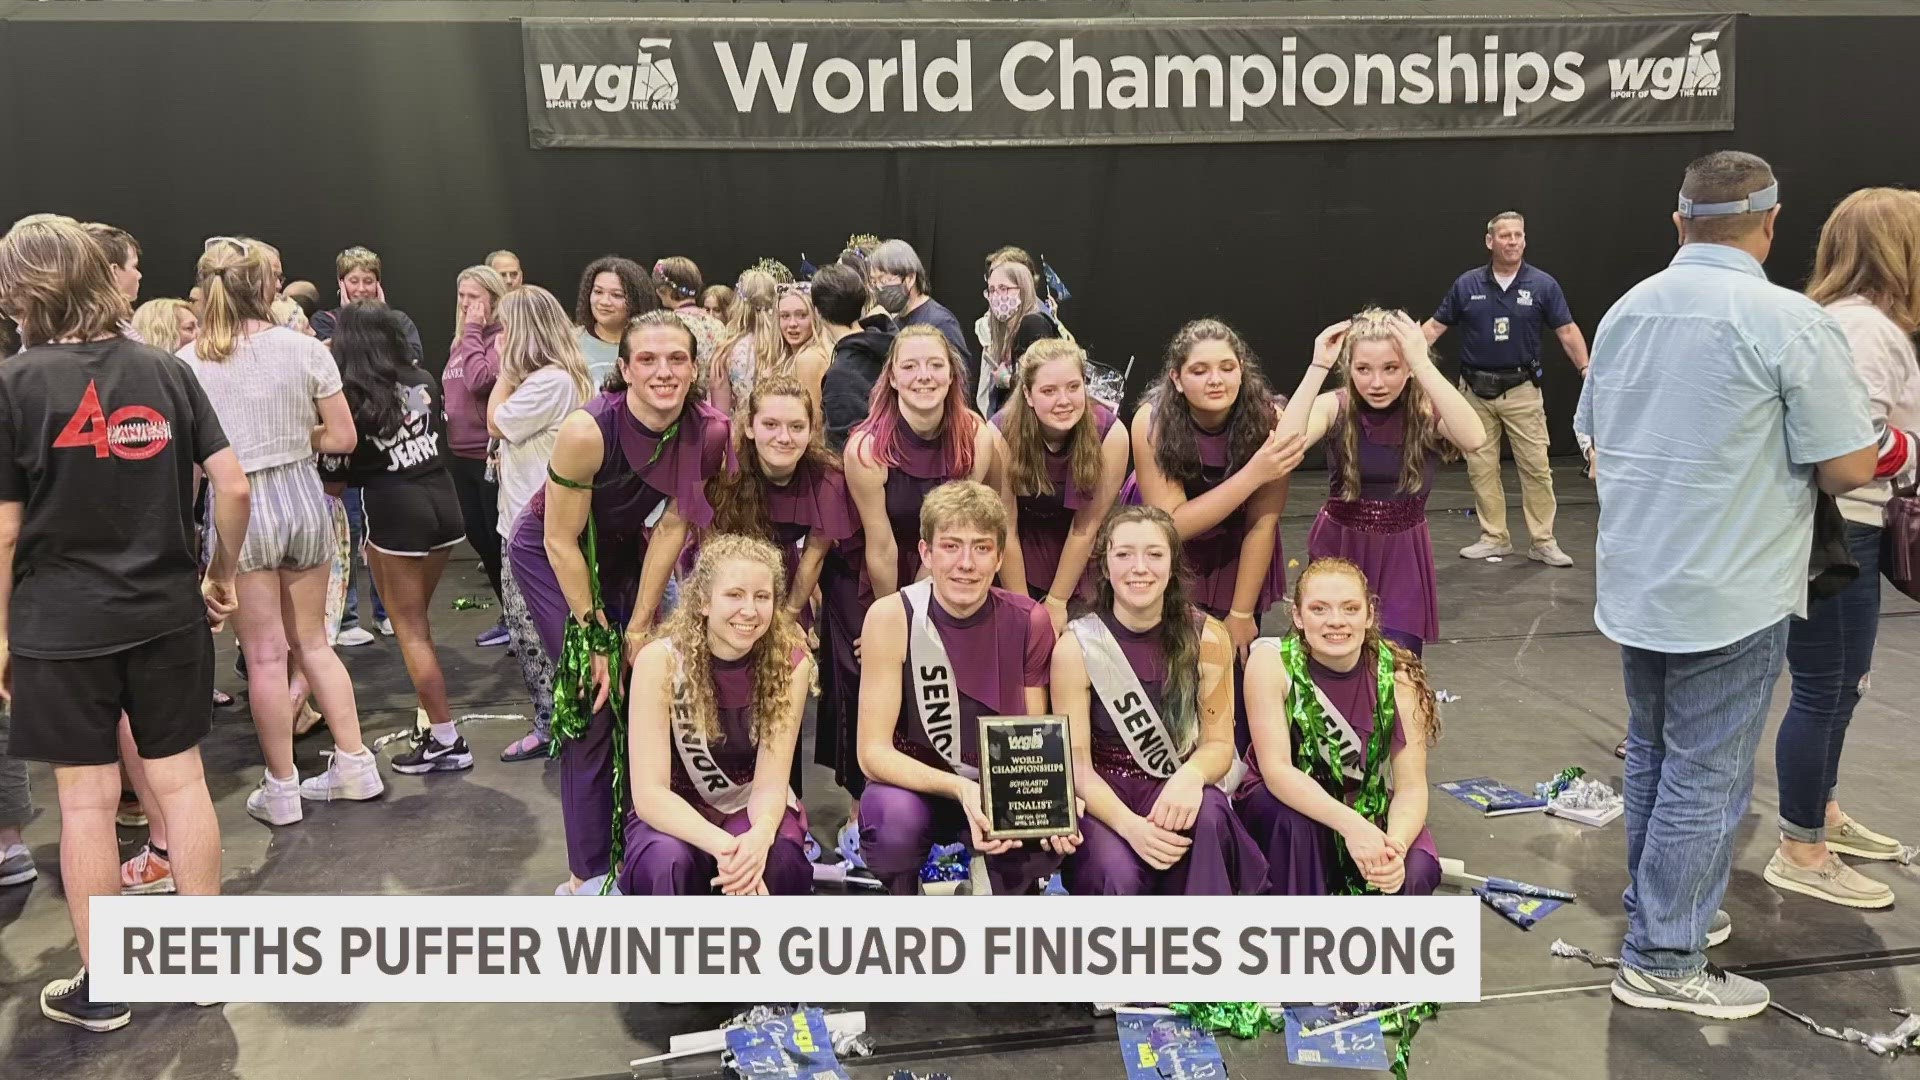 Reeths-Puffer Varsity Winter Guard placed ninth at the WGI World Championships in Dayton, Ohio over the weekend.